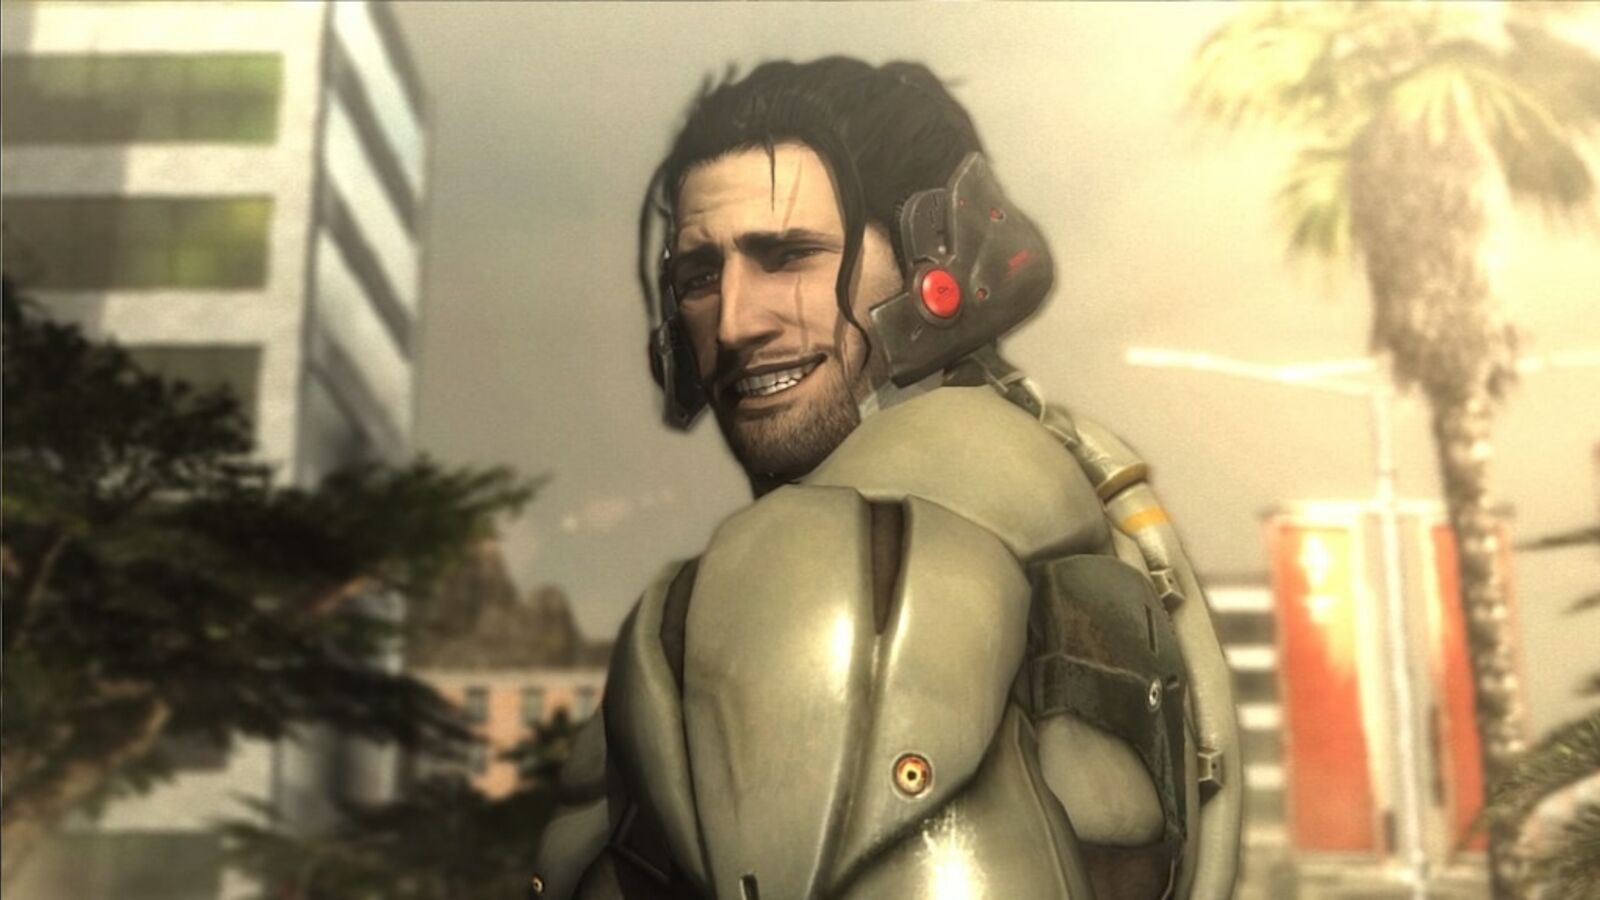 Jetstream Sam Meme Appears To Have Given Metal Gear Rising